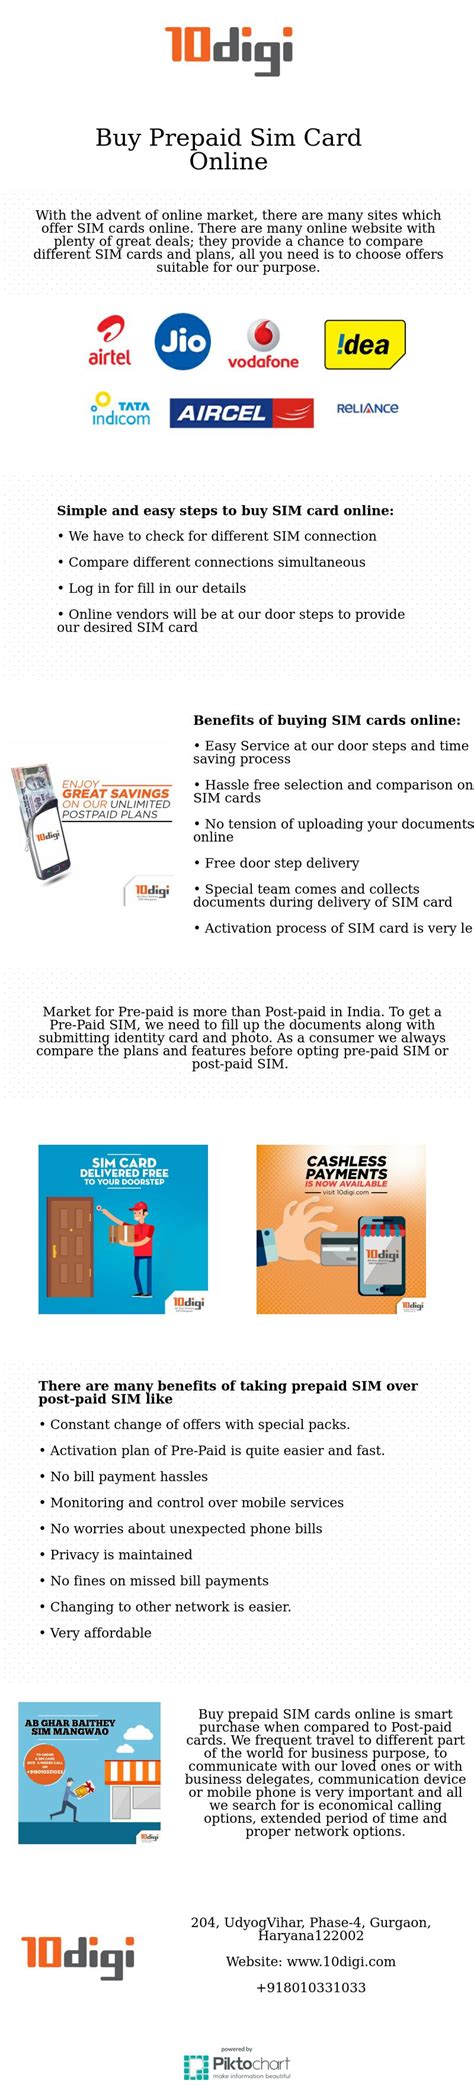 Celcom xpax challenges hotlink with its new truly unlimited prepaid pass. 10 digi is a leading online buying website for prepaid SIM ...